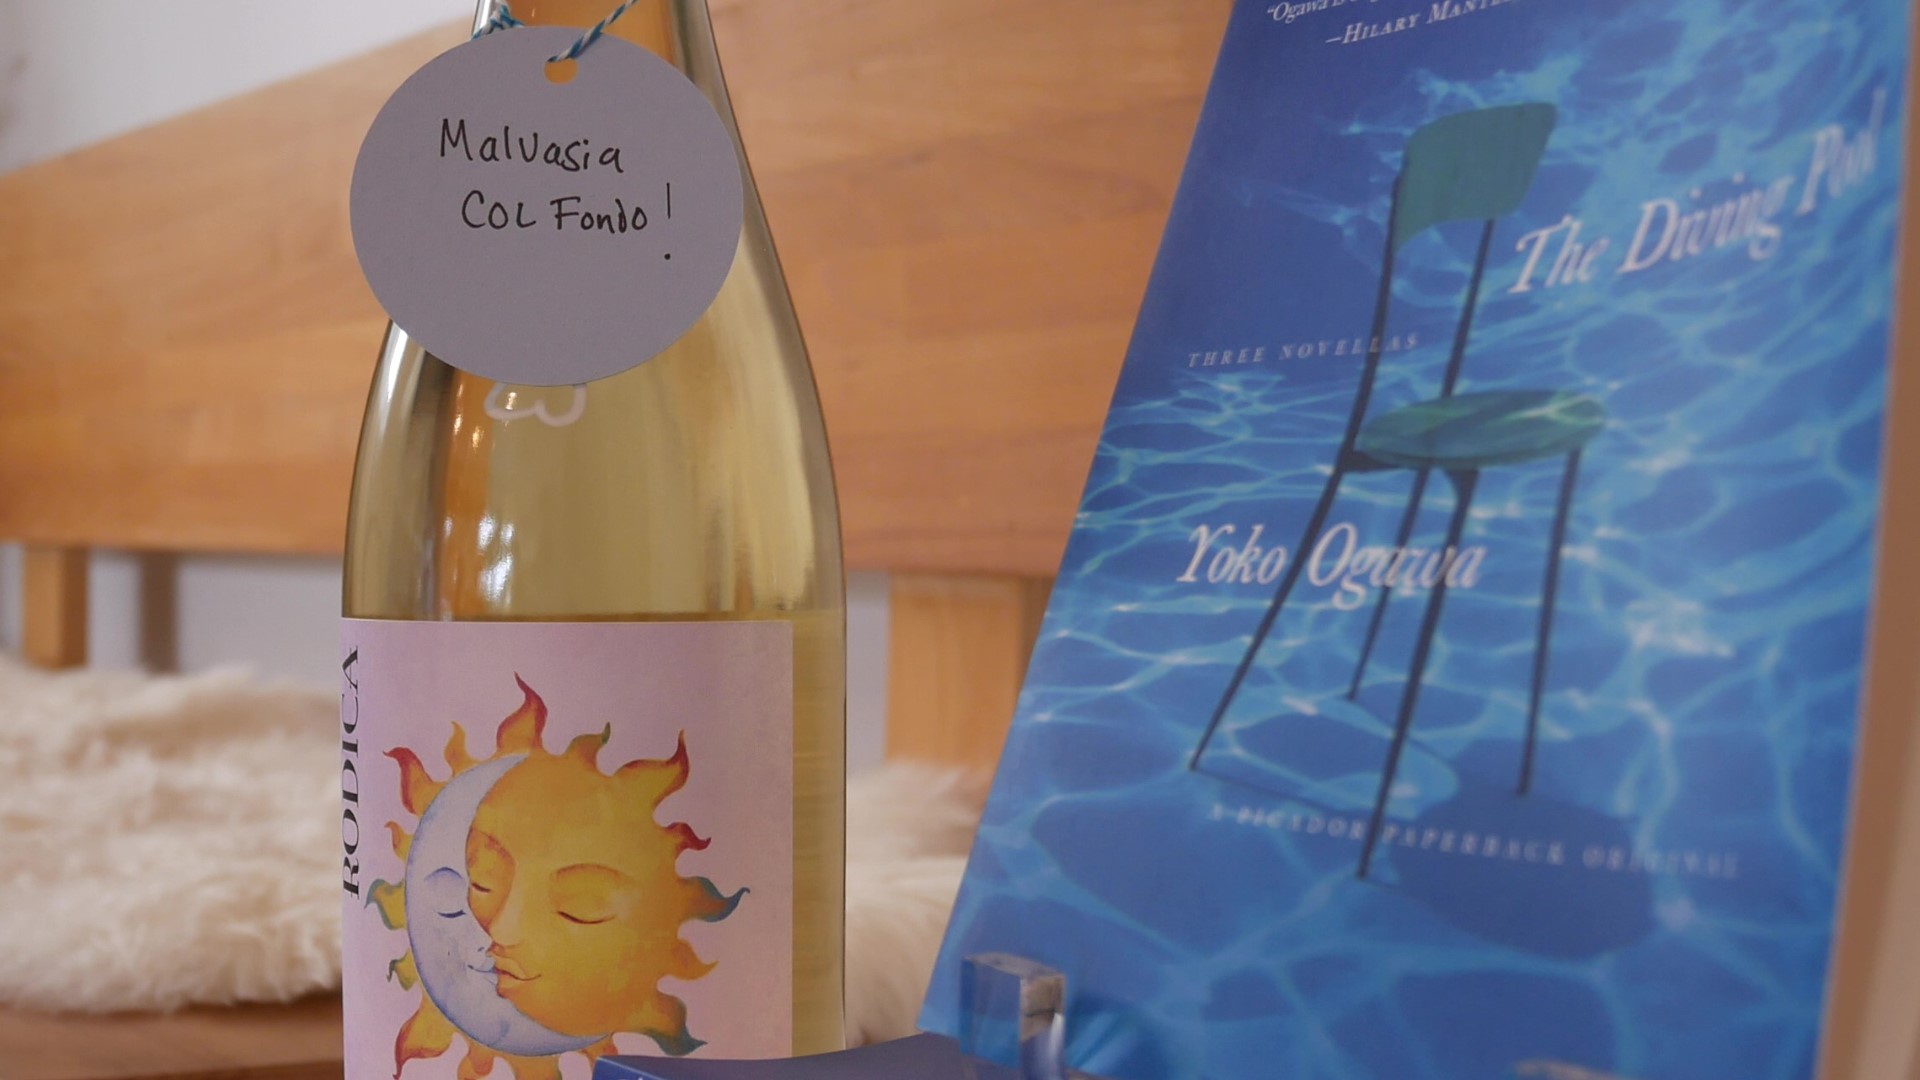 Drink Books is run by two friends who love literature and wine. #k5evening